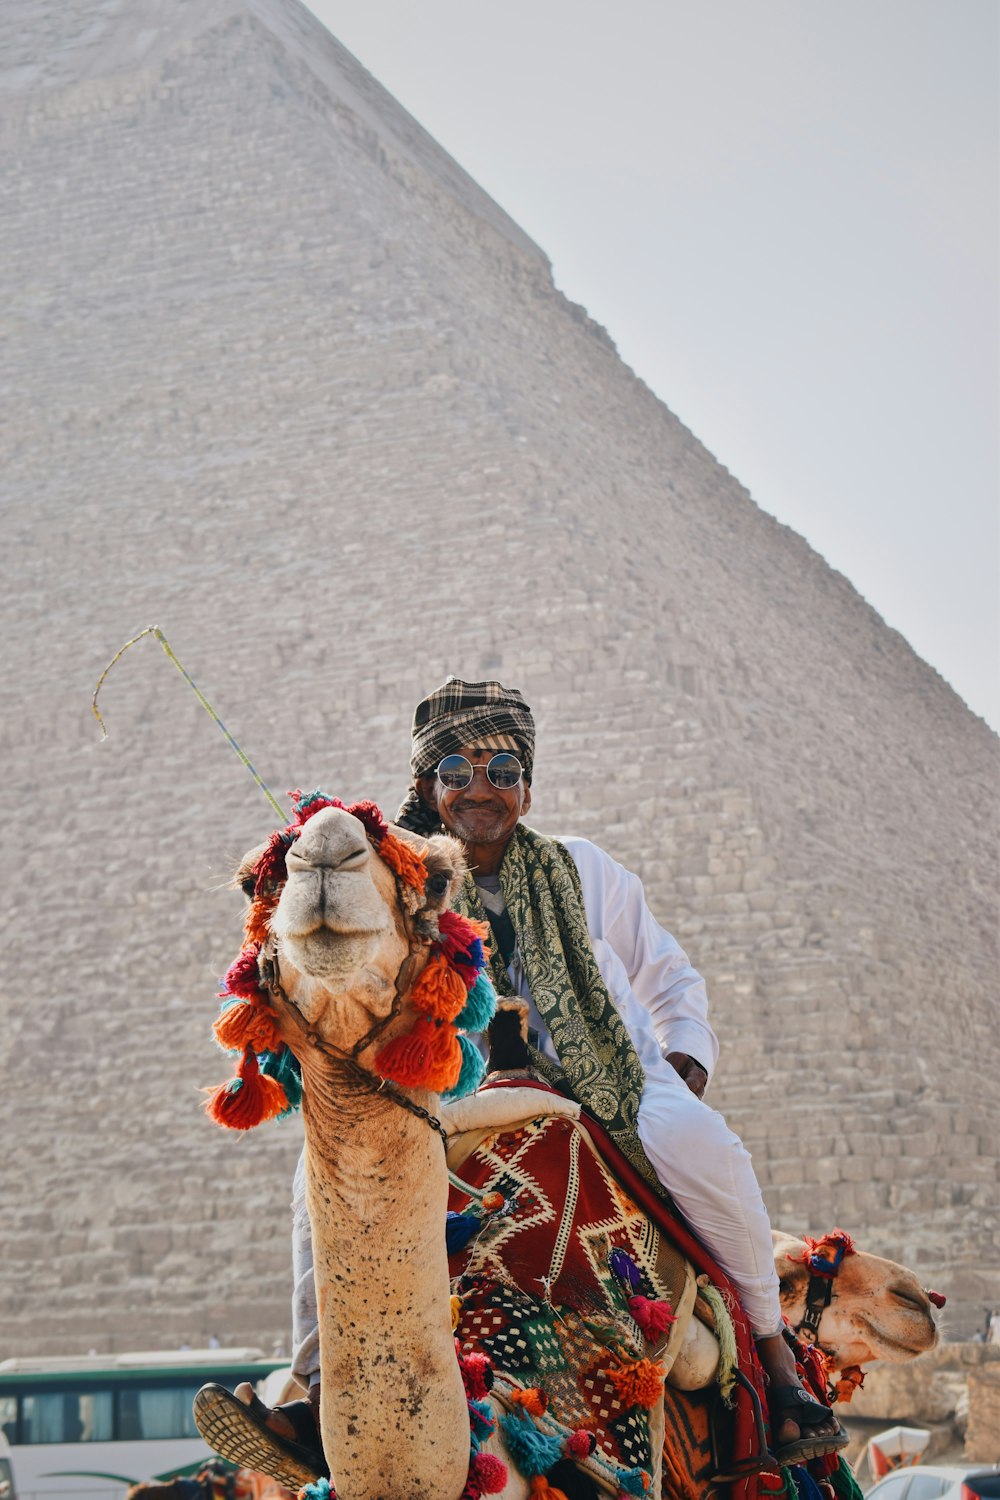 a man riding on the back of a camel